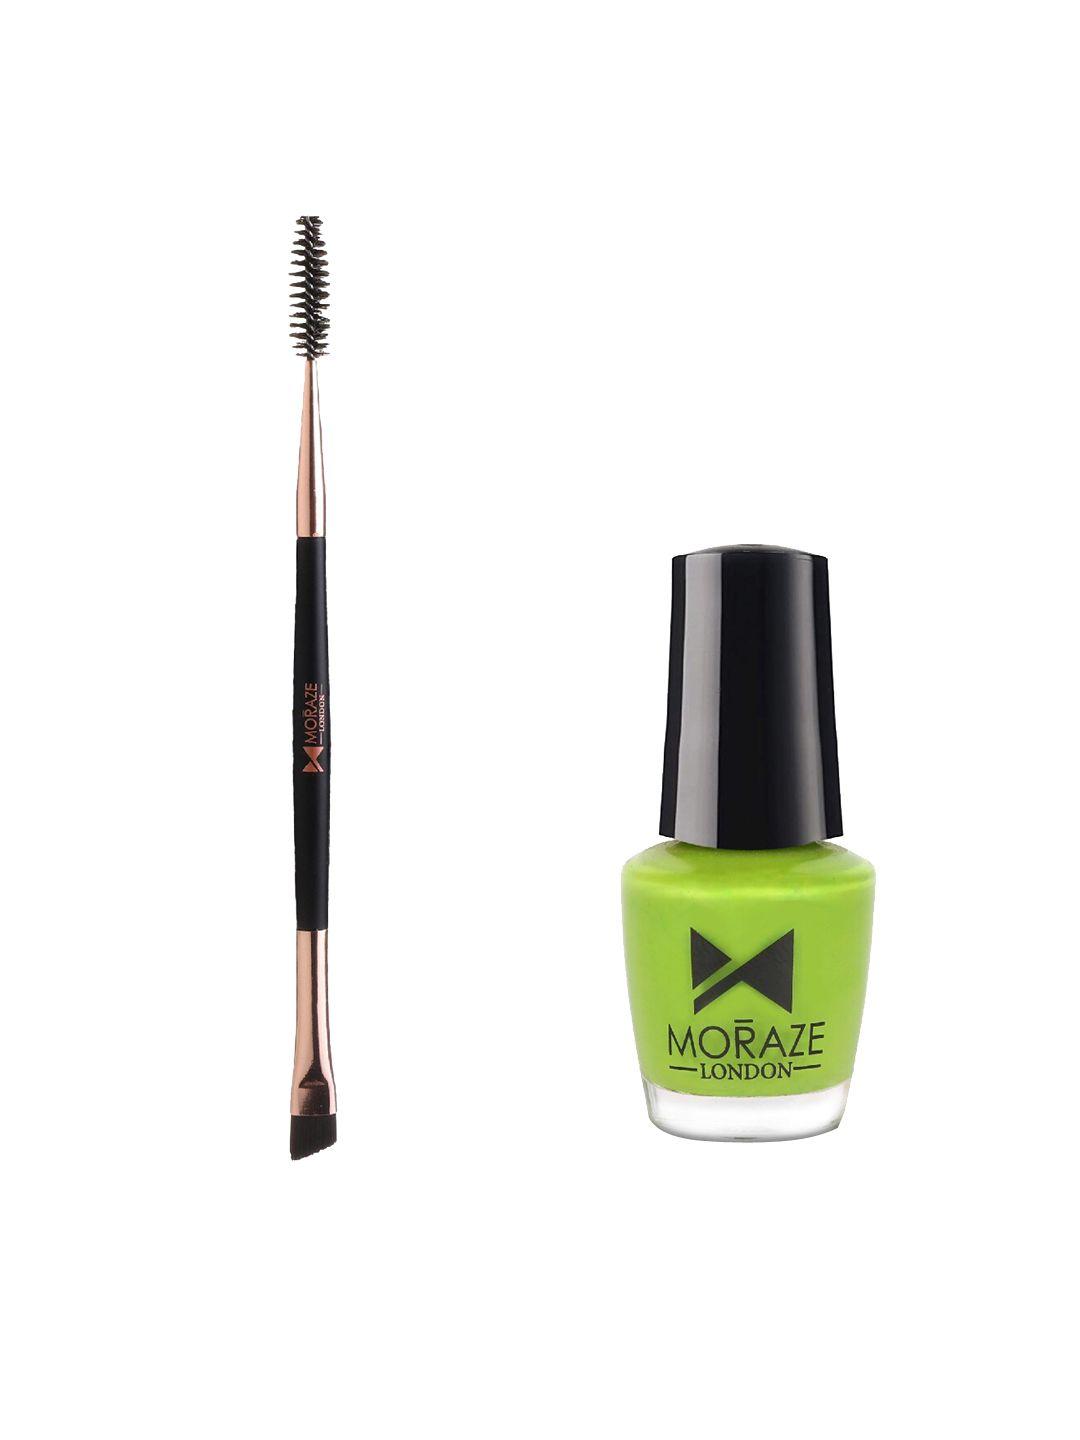 moraze set of double ended brush & nail paint 5 ml - forest forest